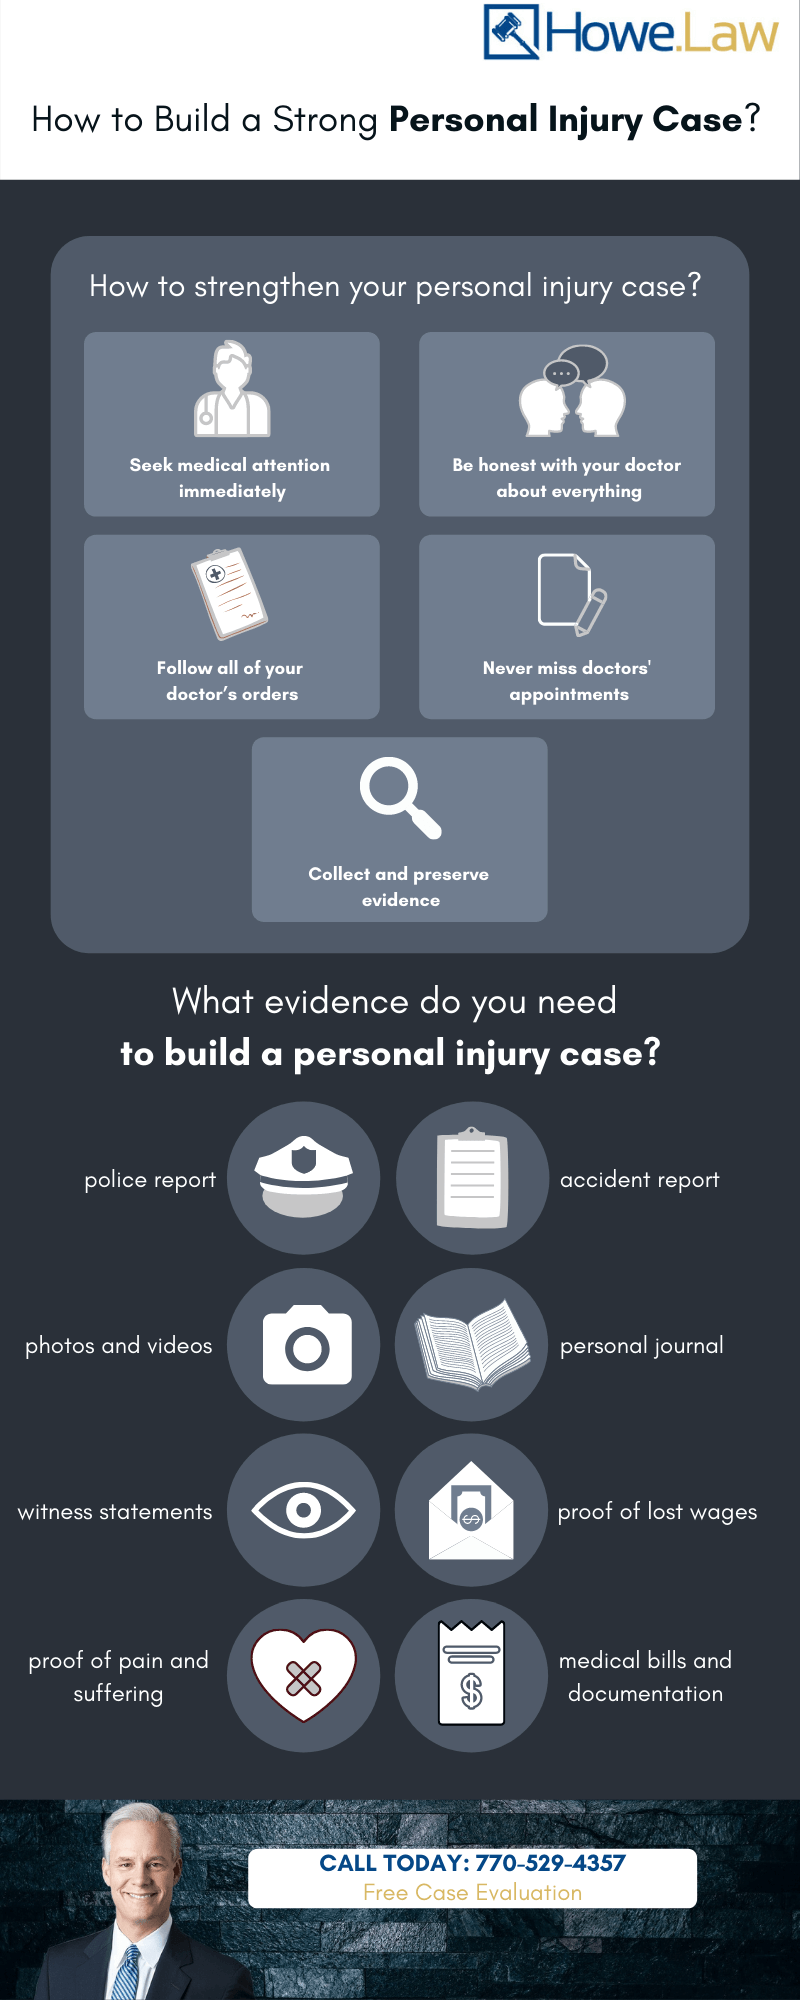 When and Why Should I Hire a Personal Injury Attorney